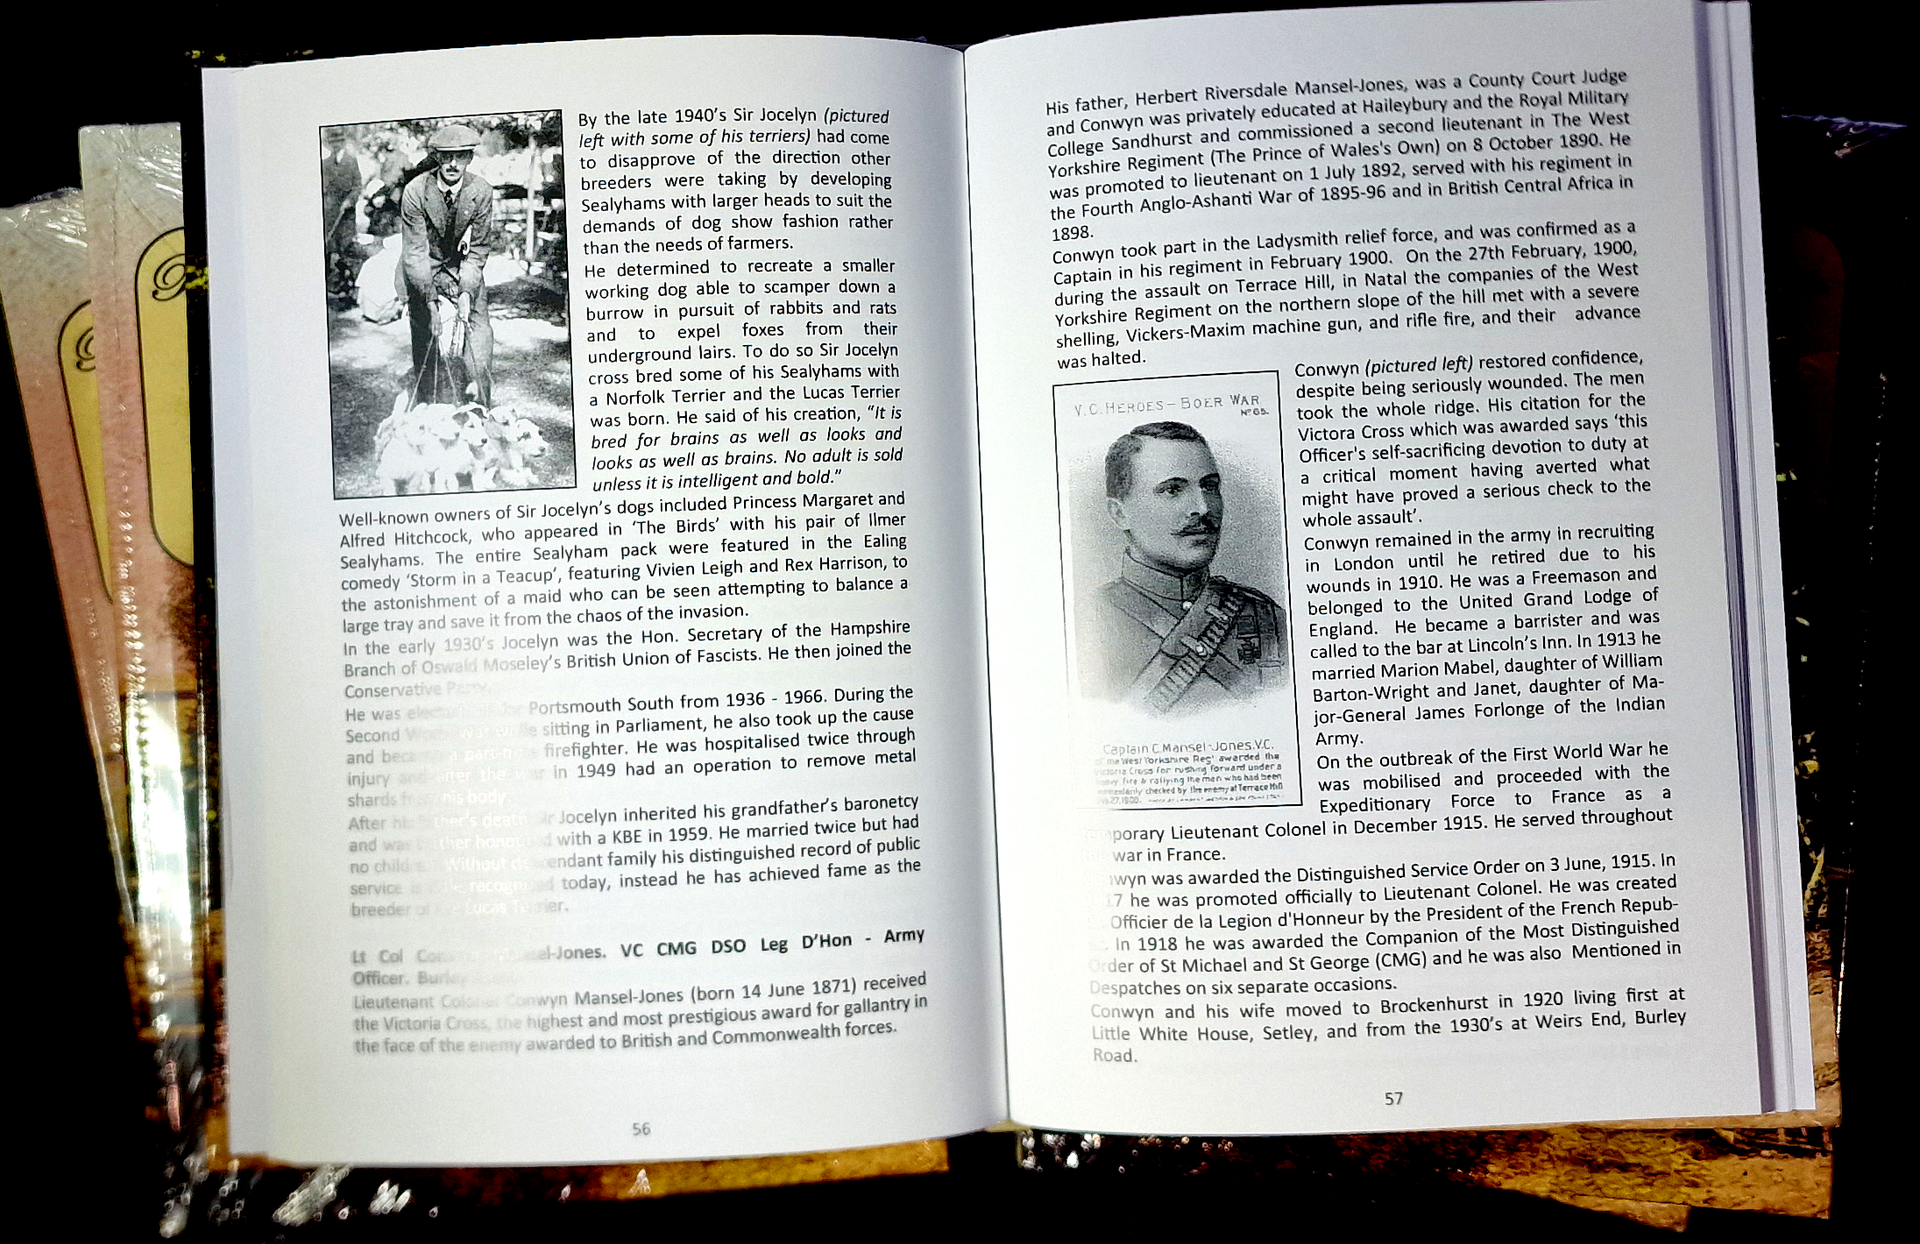 Pages from Brockenhurst Book